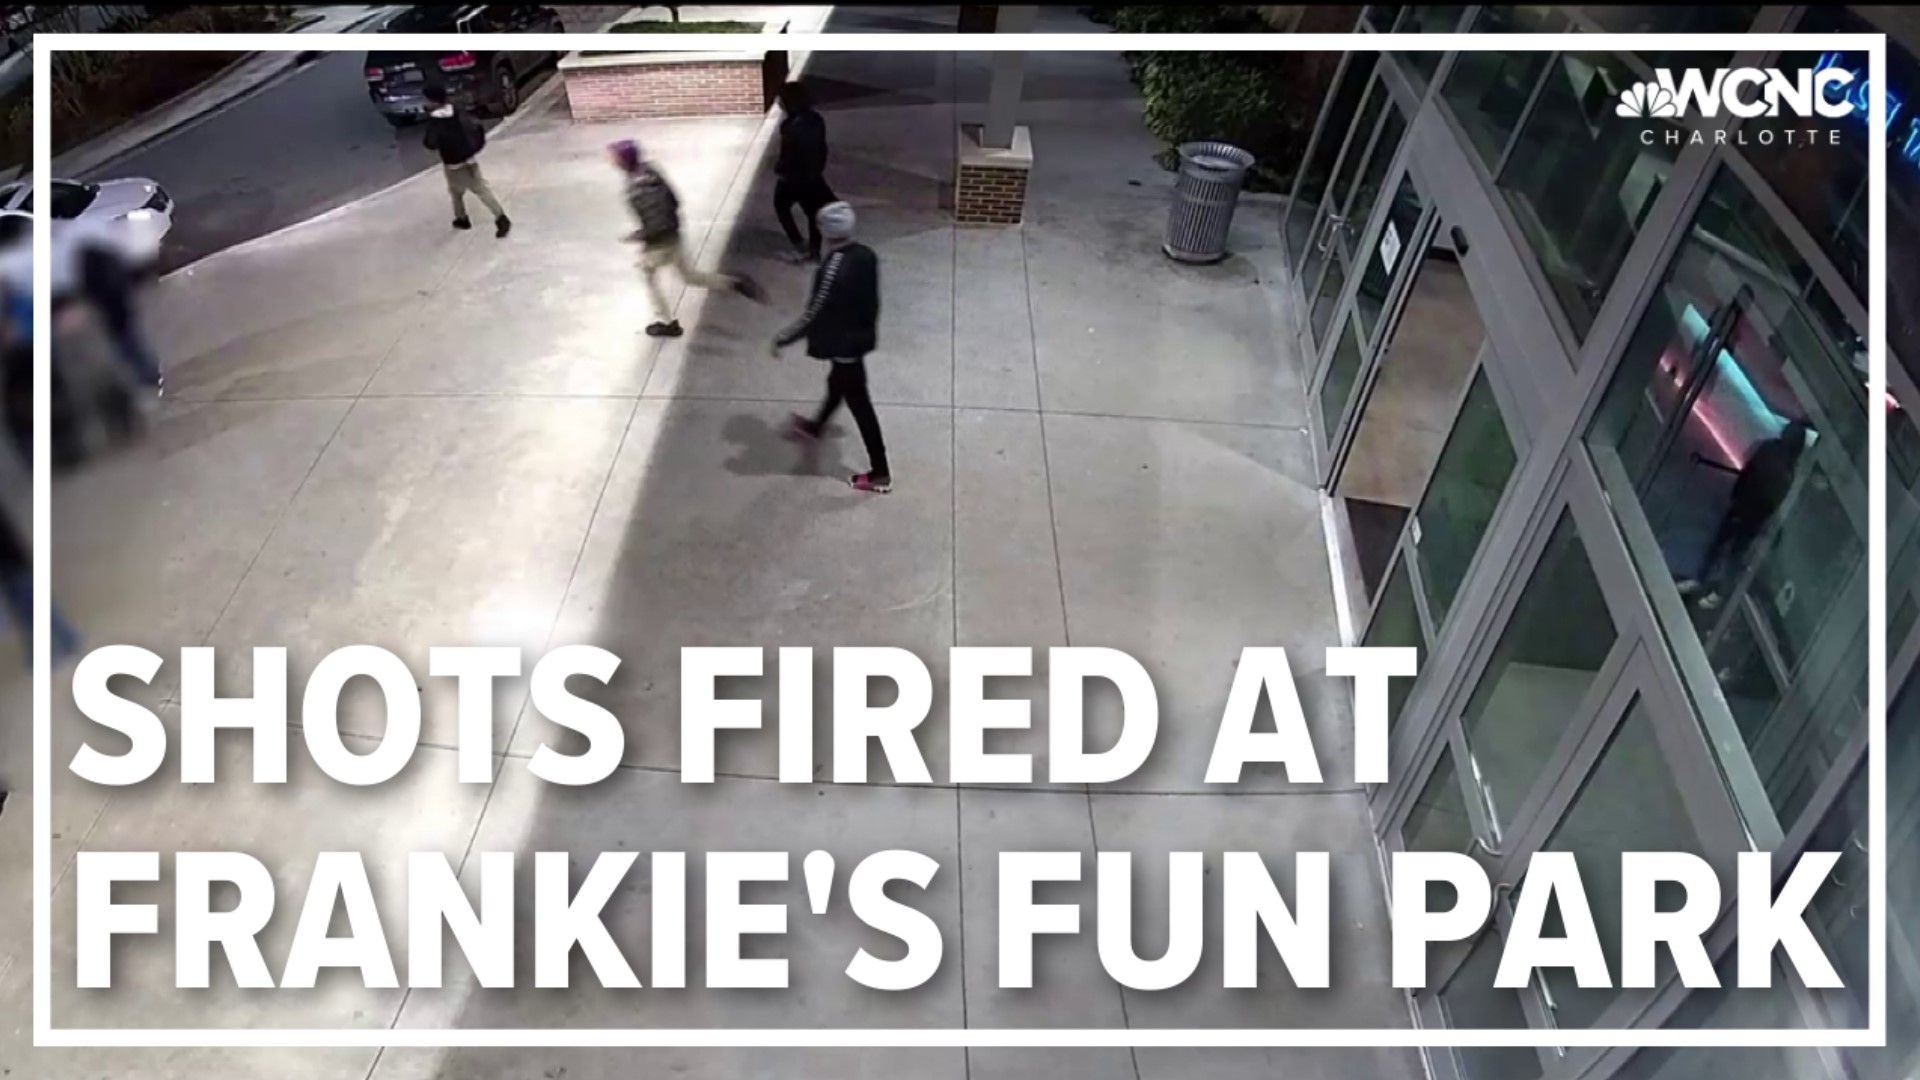 Nearly a dozen shots were fired when two groups got into an argument at Frankie's Fun Park in Huntersville on Jan. 6, police said.